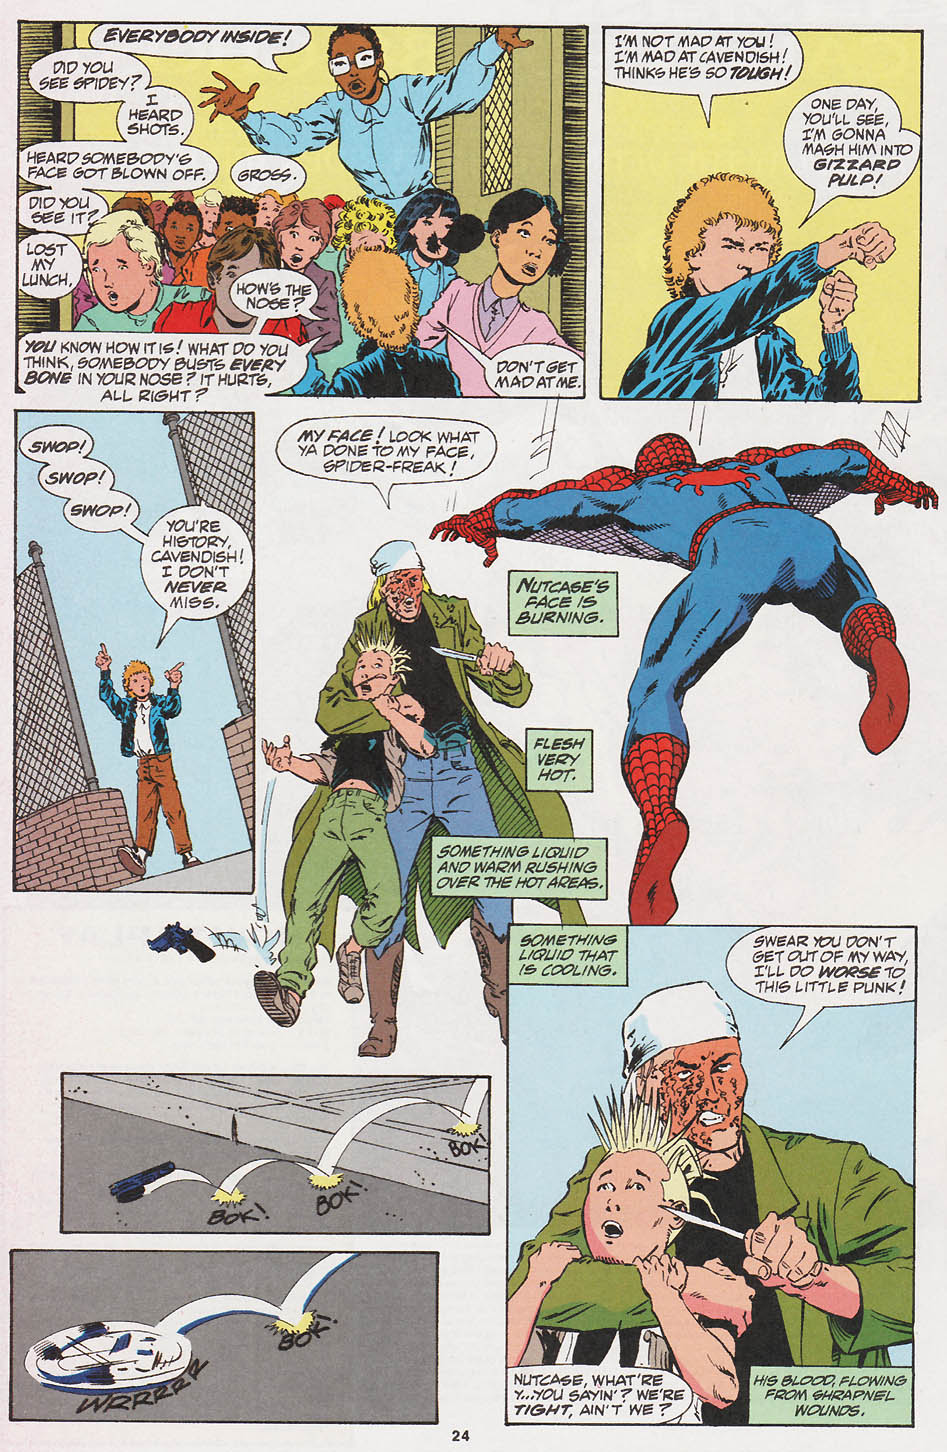 Spider-Man (1990) 27_-_Theres_Something_About_A_Gun_Part_1 Page 17